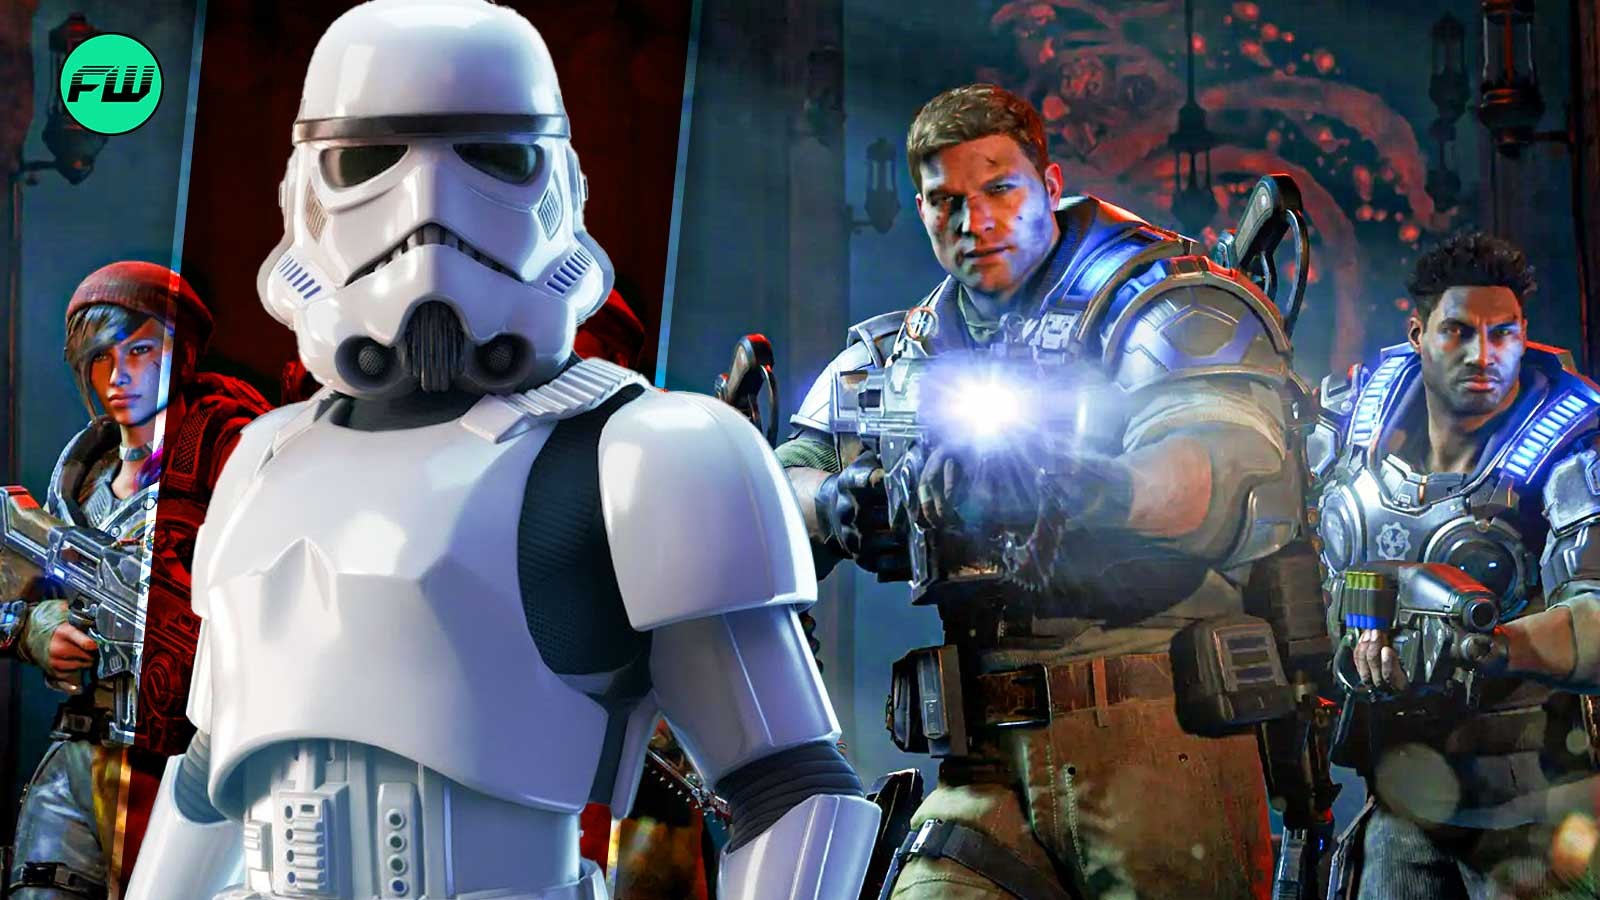 Star Wars and Gears are inextricably linked in the stupidest way